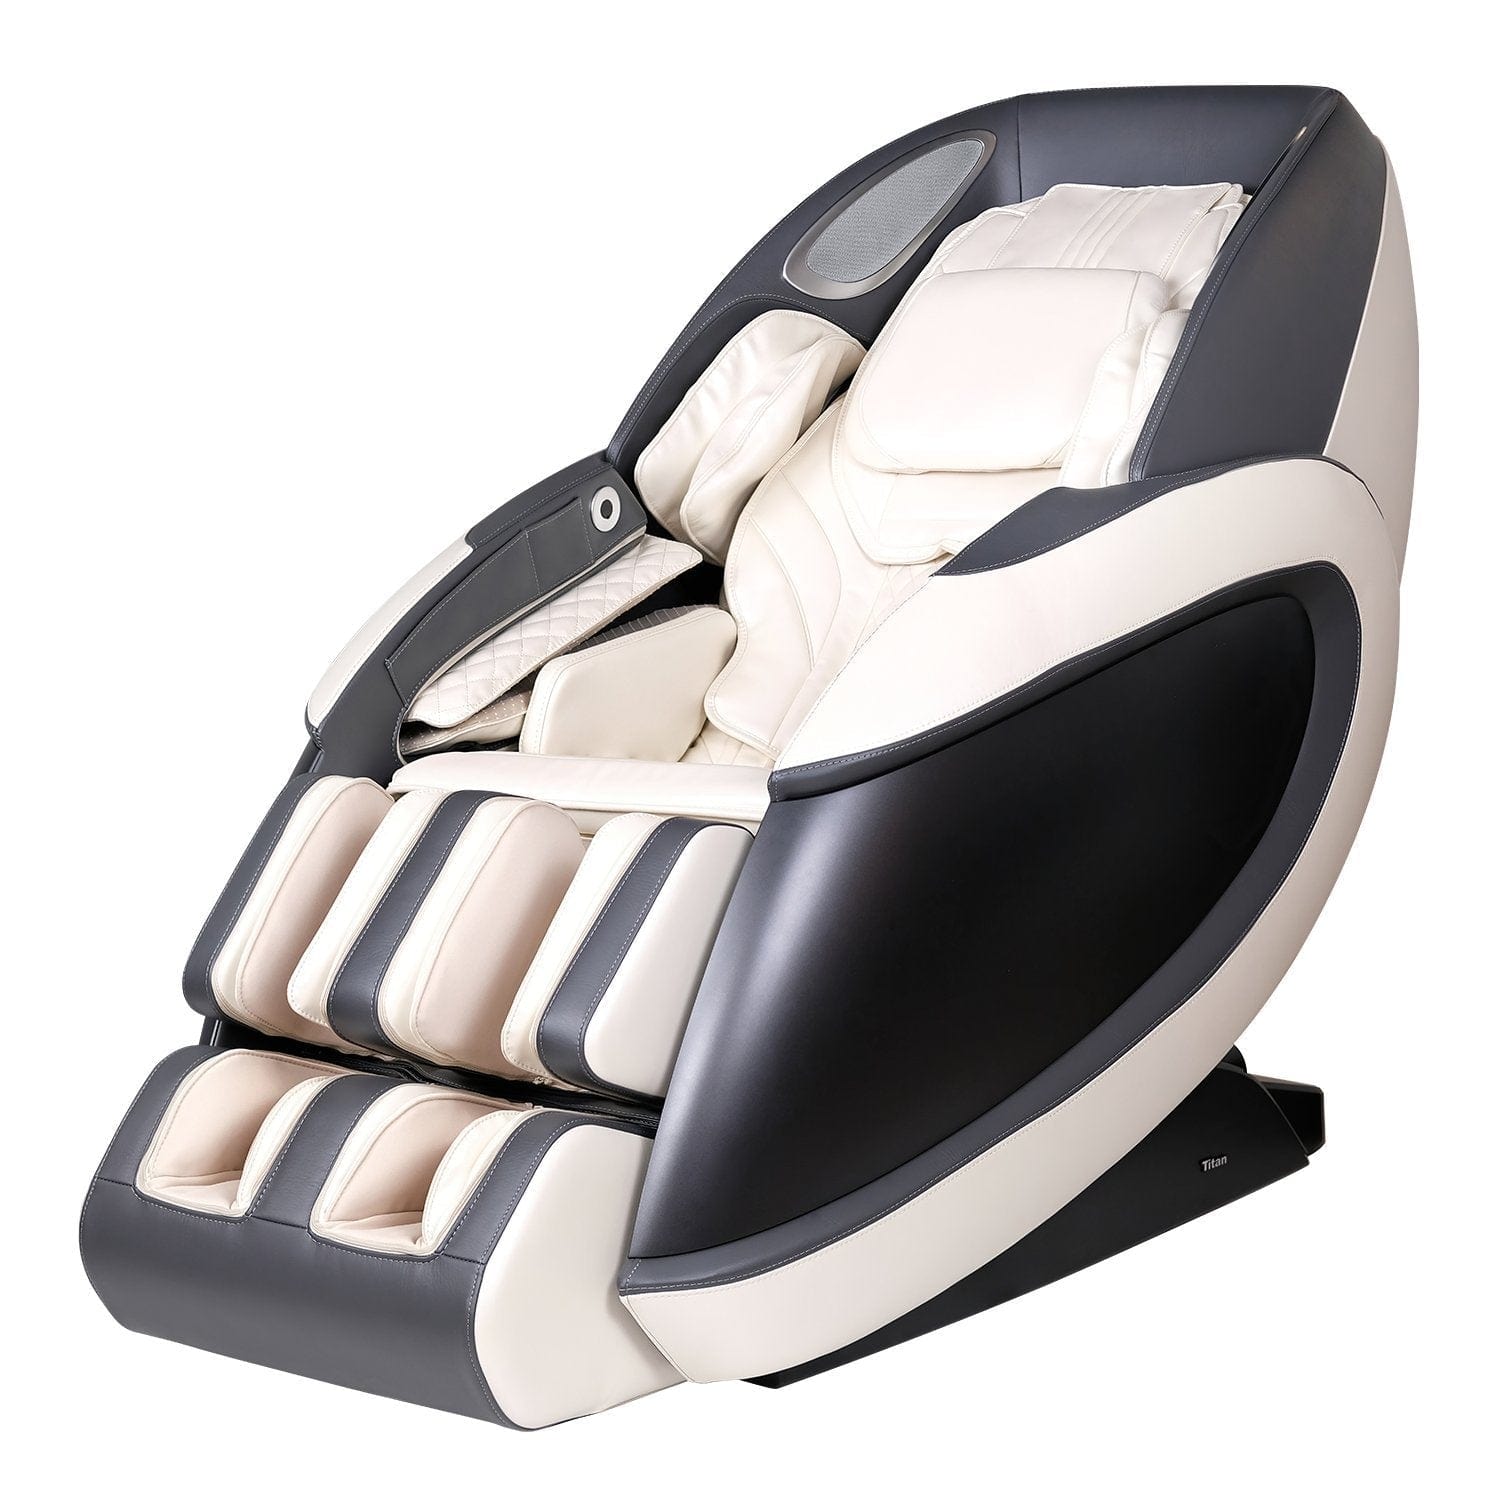 Titan 4D Fleetwood LE | Titan Massage Chairs Taupe / Curbside Delivery - Free / 5 Year (3 Years Full Service & Additional 2 Years Parts) titan-chair